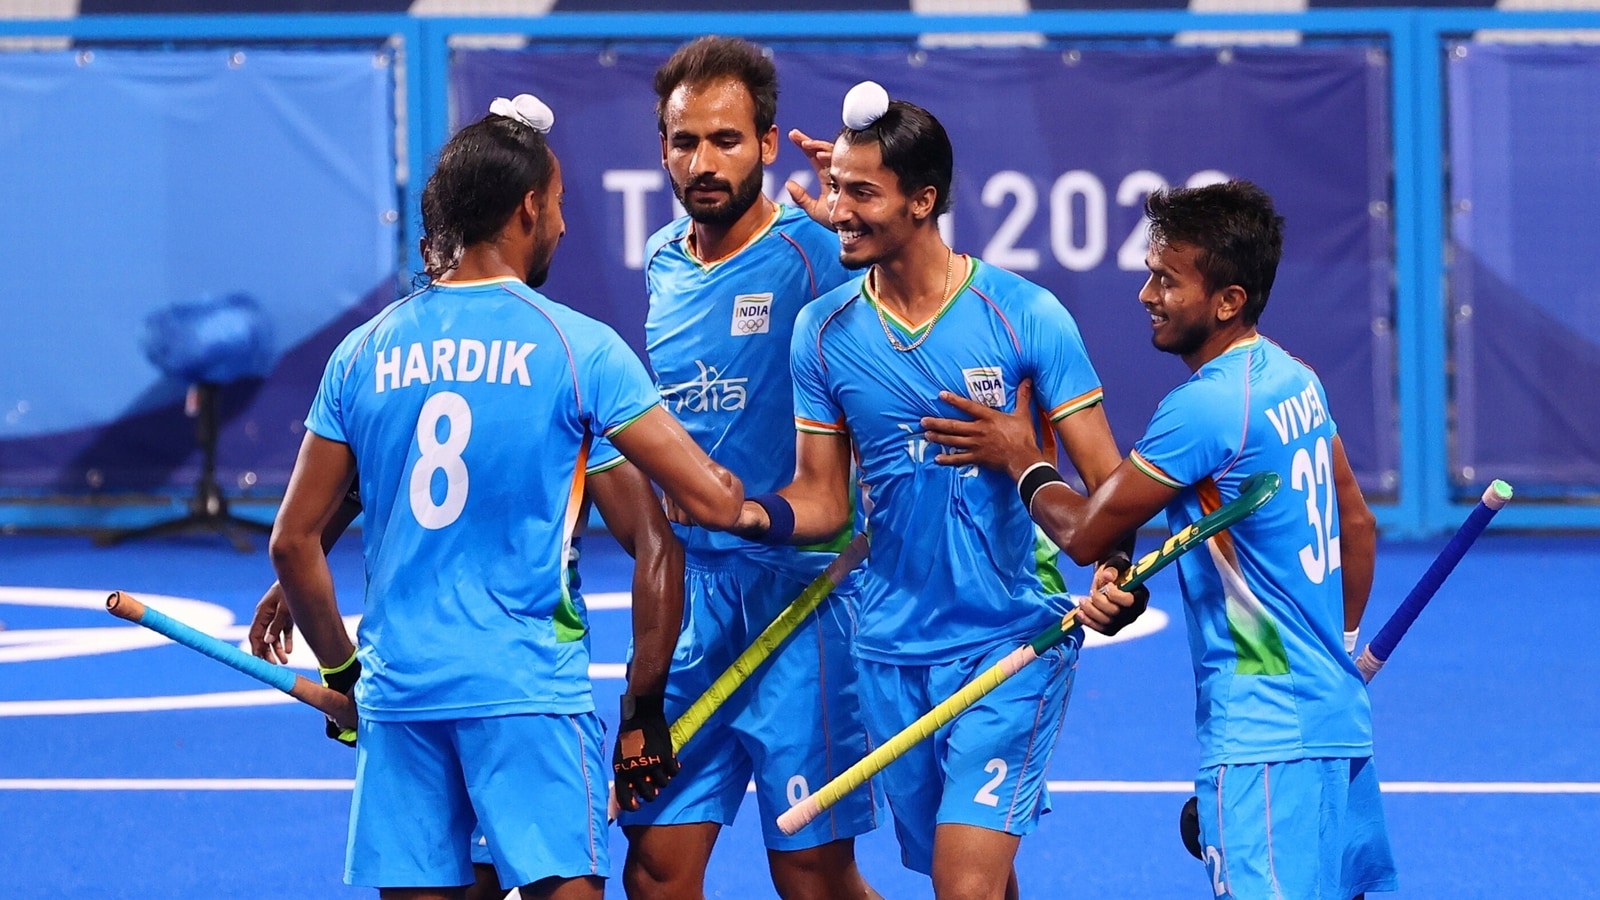 Tokyo Olympics: India men's hockey team enters semifinal with 3-1 win over  Great Britain | Olympics - Hindustan Times